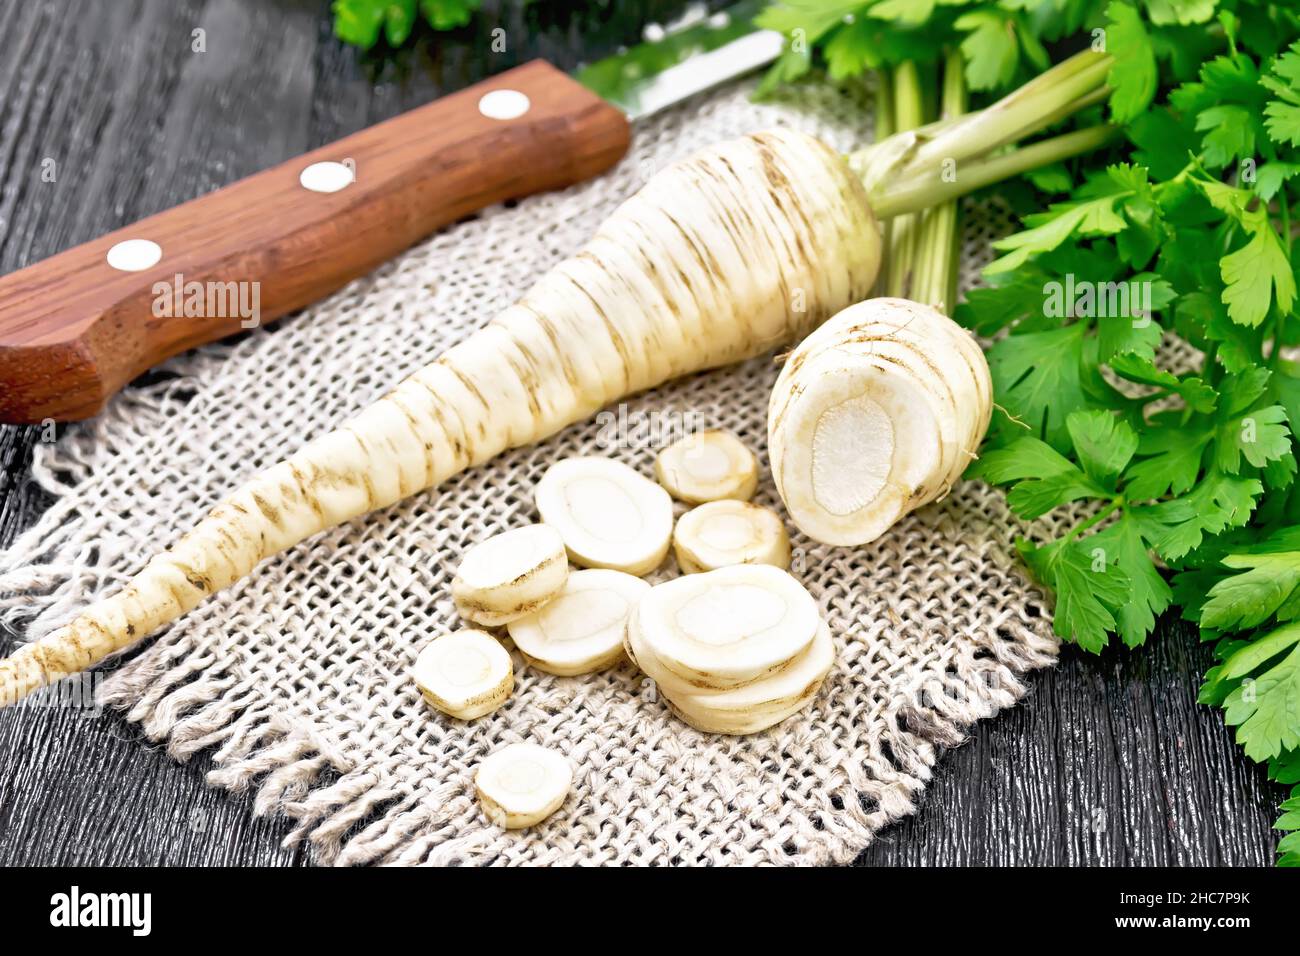 Parsley roots whole and chopped with green tops on a burlap napkin and a knife on dark wooden board background Stock Photo